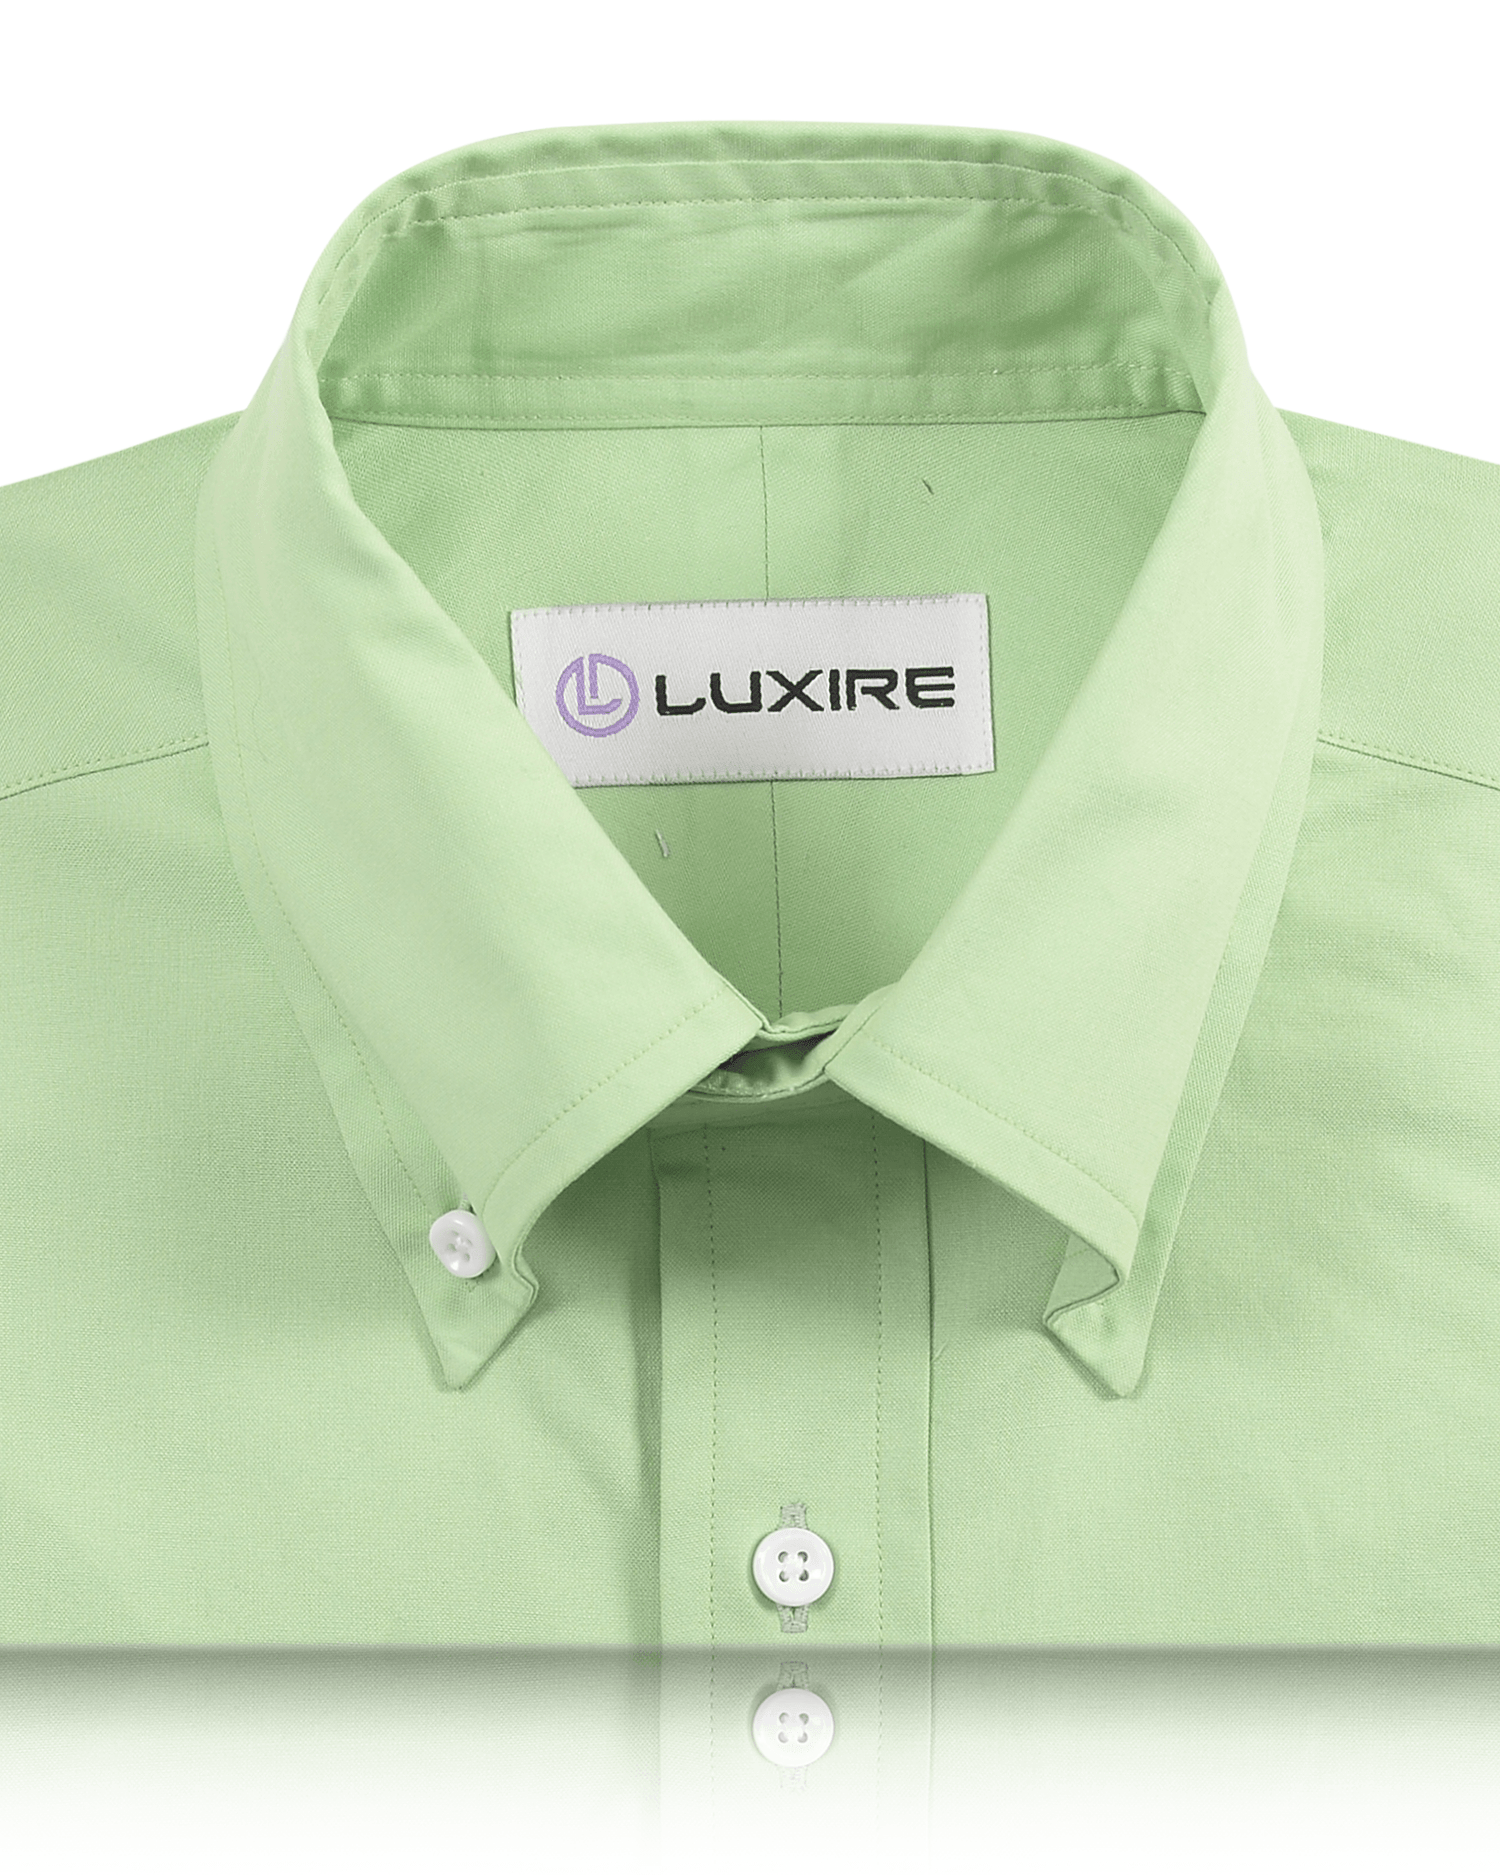 Collar of the custom oxford shirt for men by Luxire in moss green